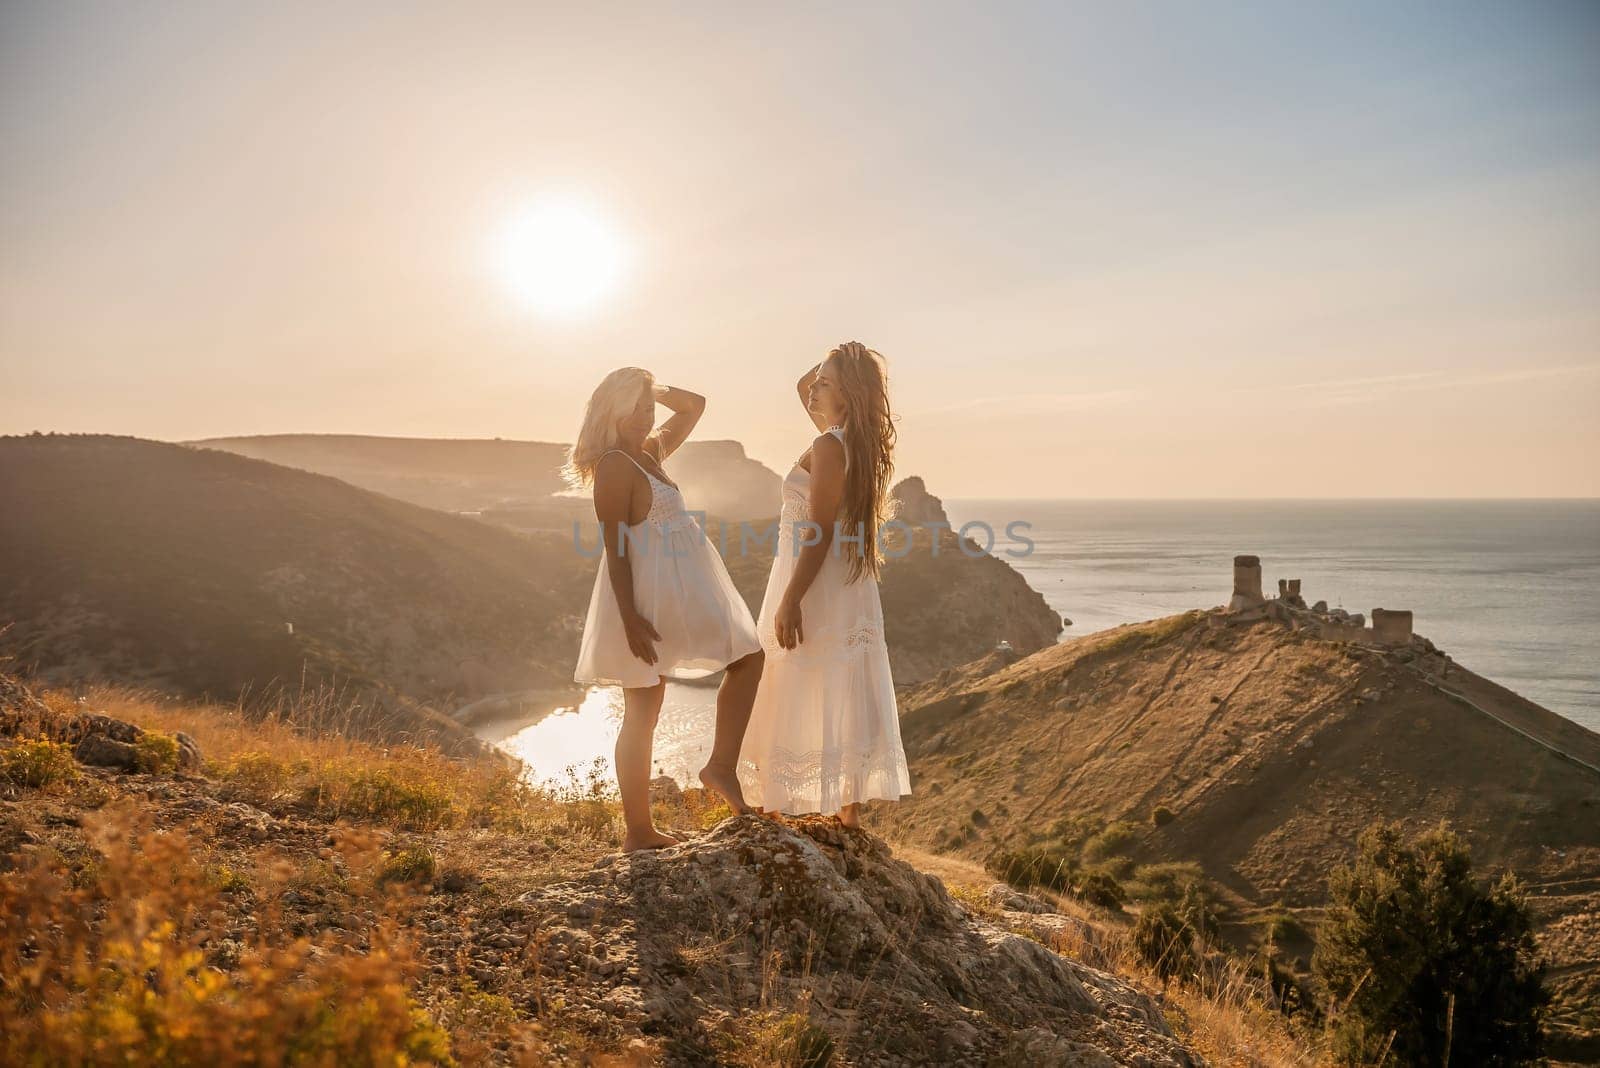 Two young girls are standing on a hillside, one of them wearing a white dress. The sun is shining brightly, creating a warm and inviting atmosphere. The girls seem to be enjoying their time together. by Matiunina